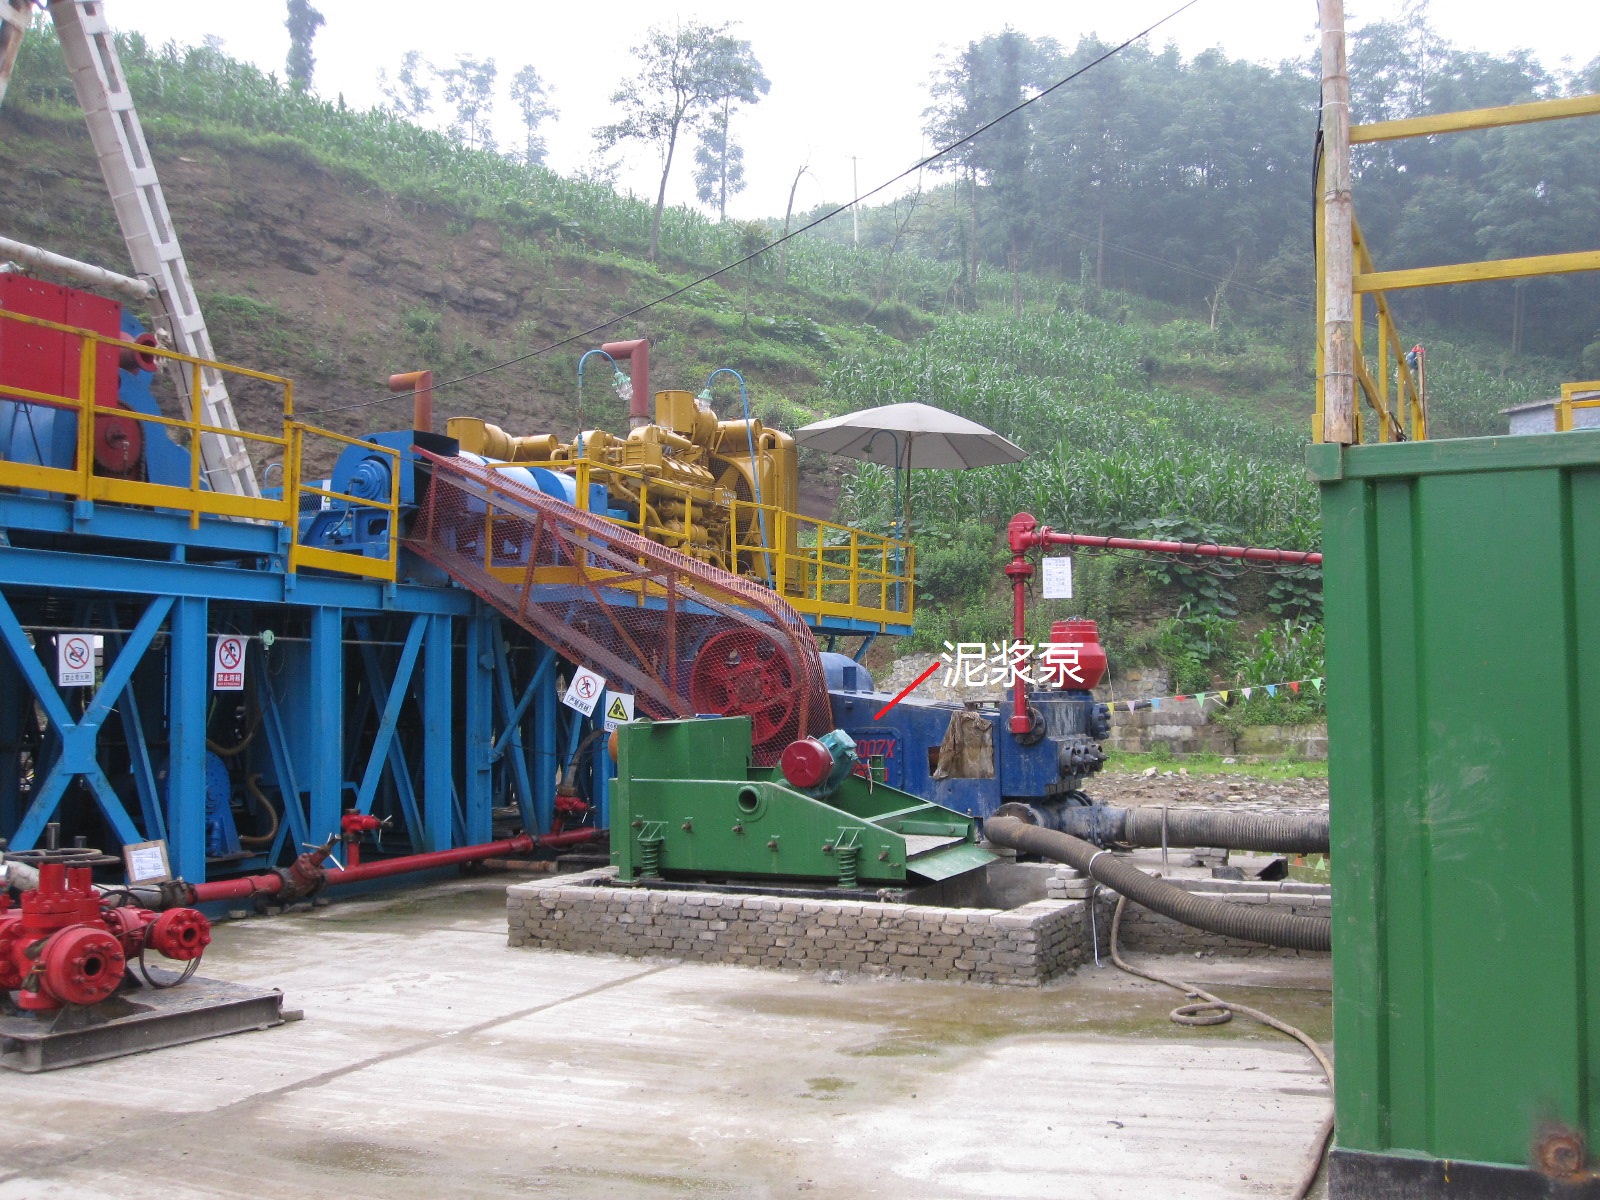 The drilling site